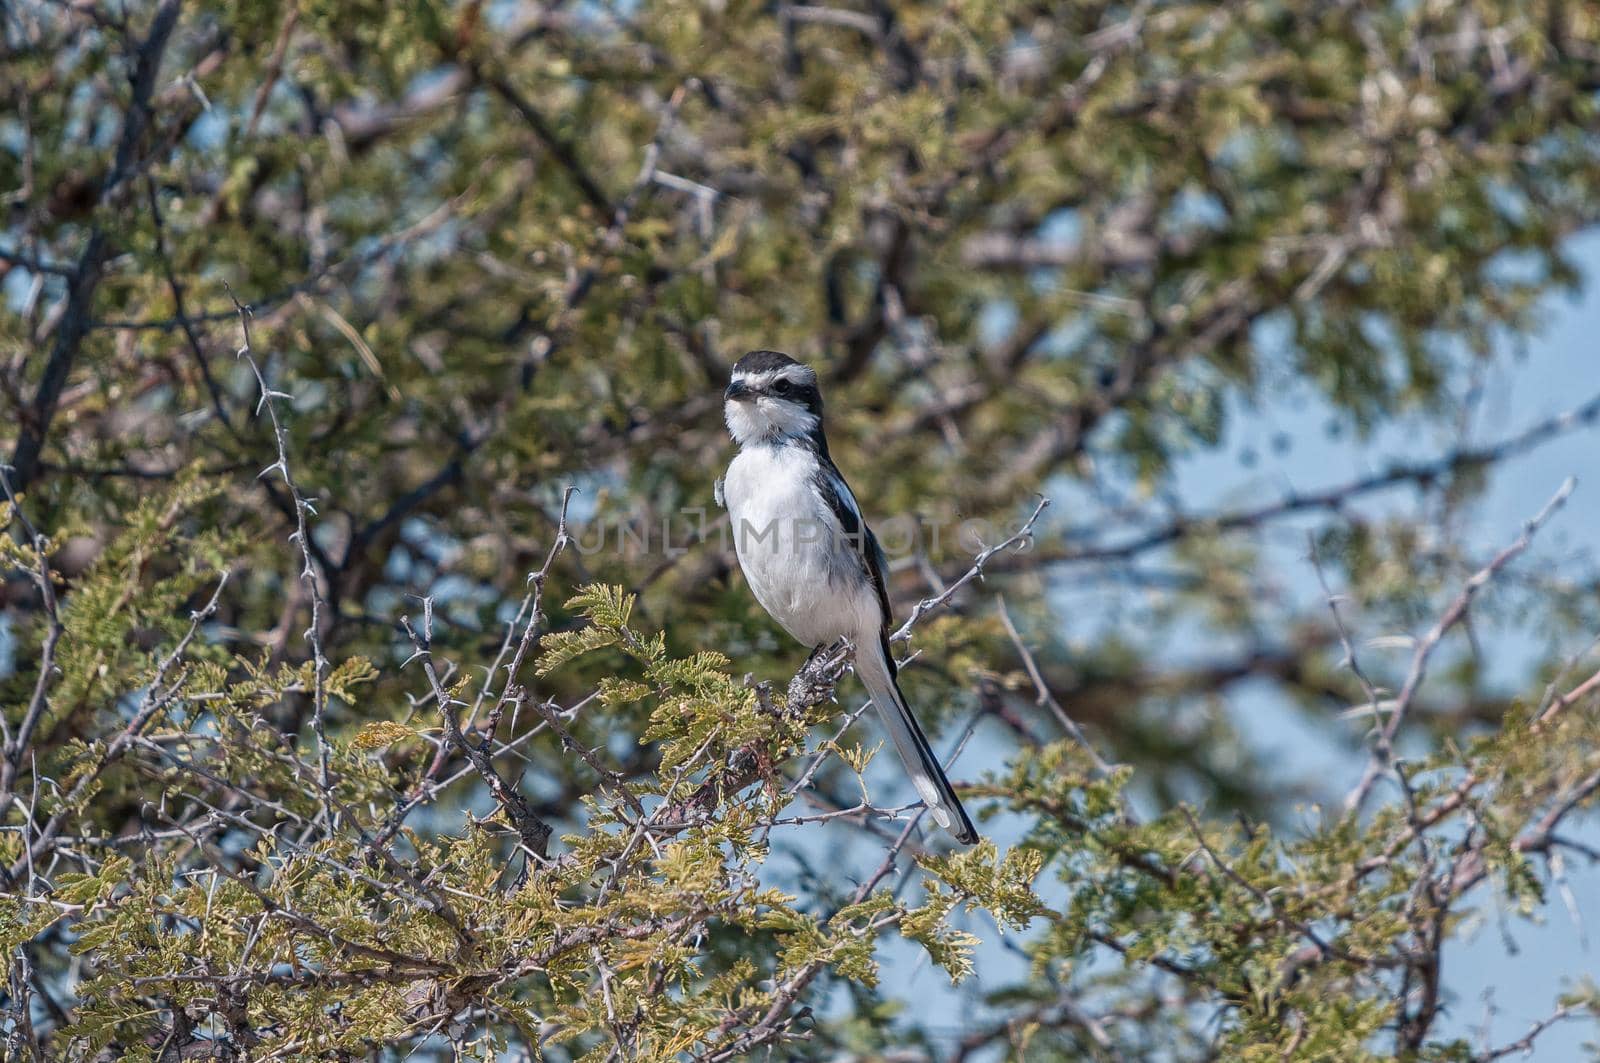 Common Fiscal, Lanius collaris, in a tree in northern Namibia by dpreezg